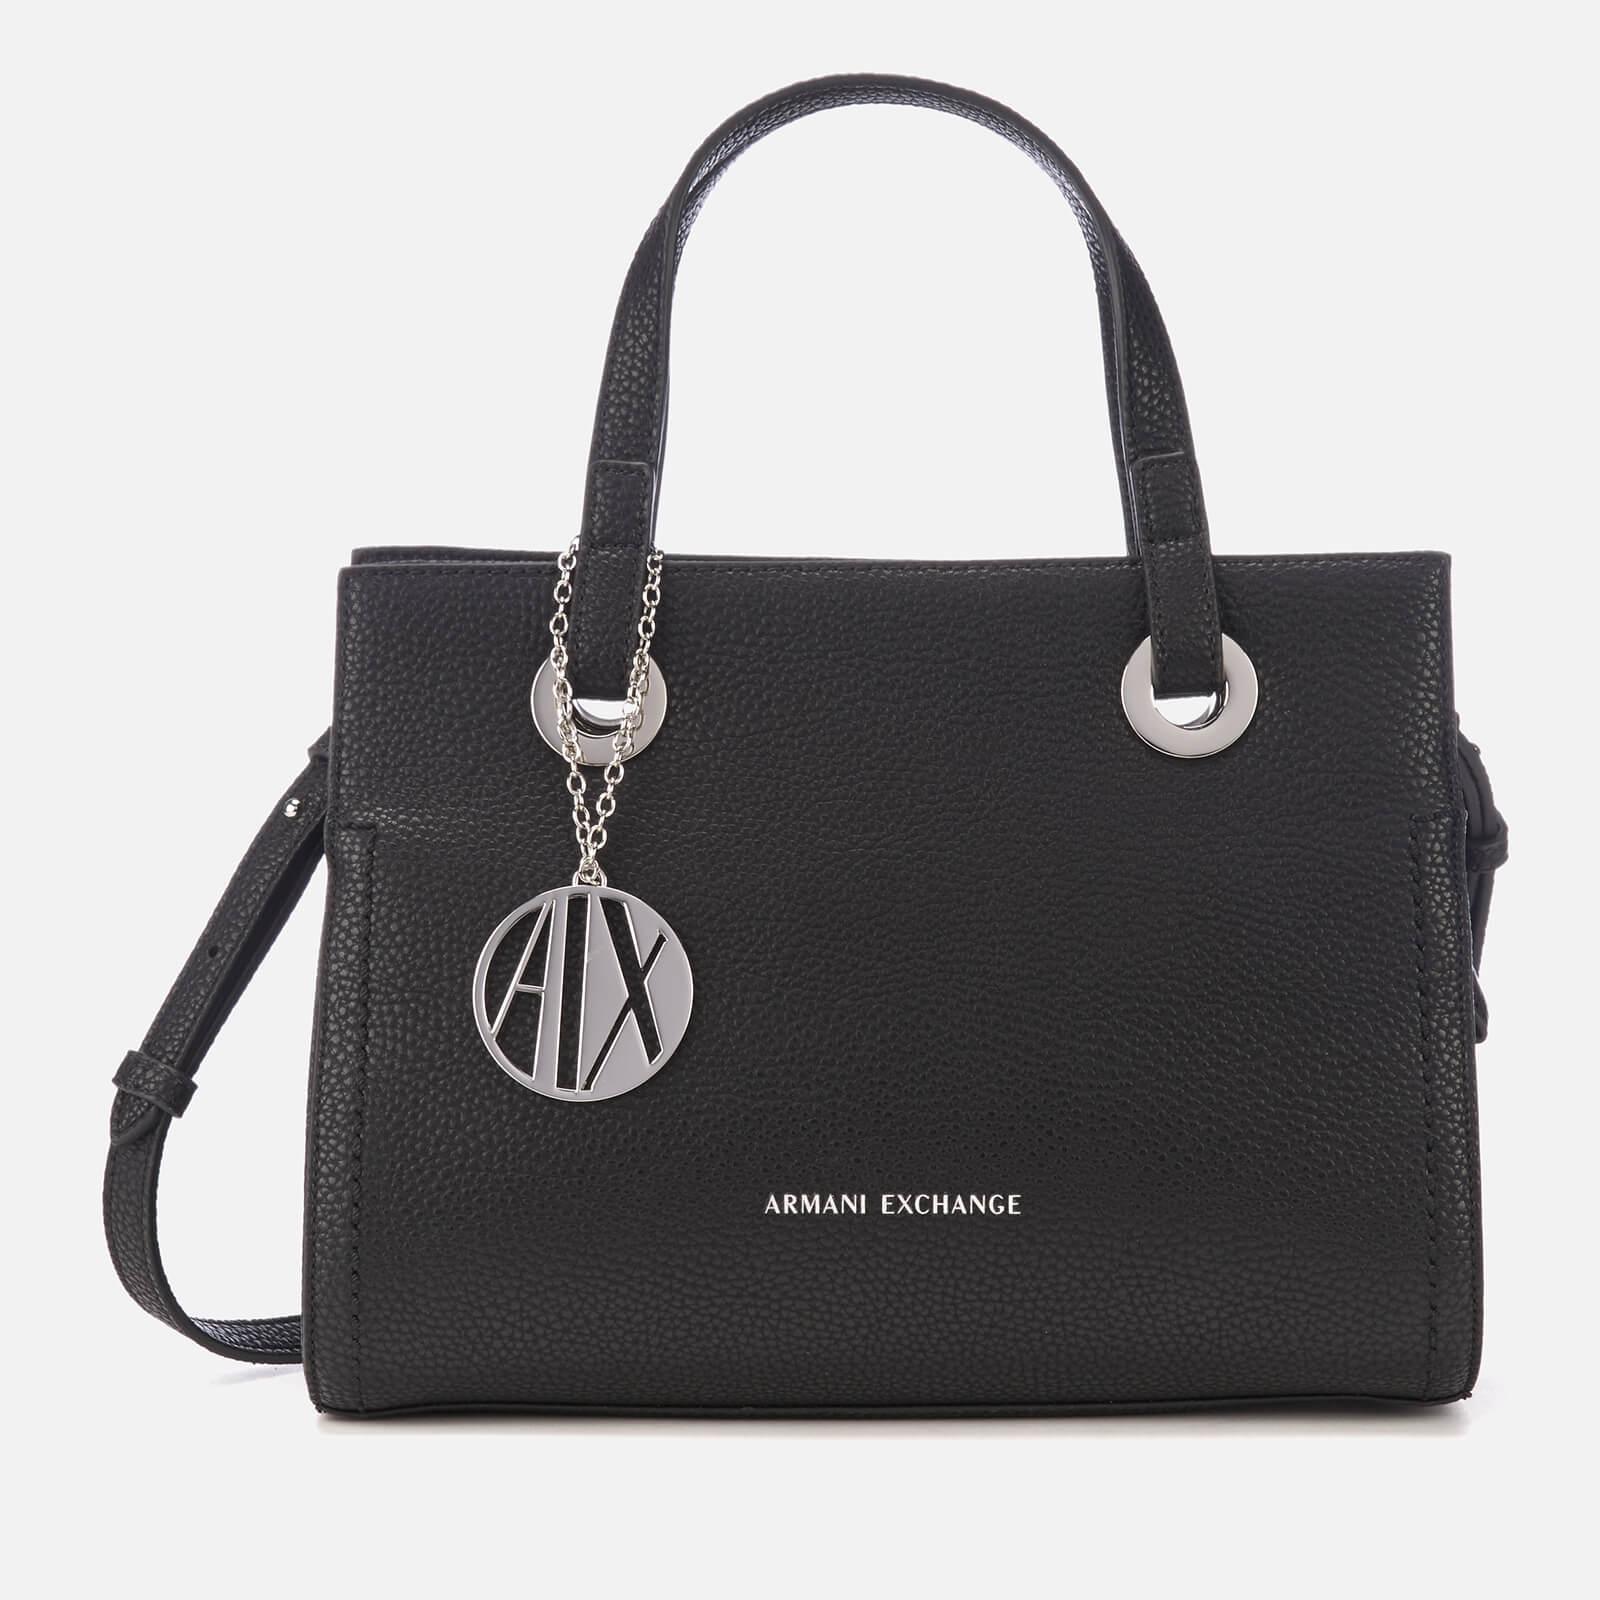 Armani Exchange Angie Small Tote Bag in Black - Lyst